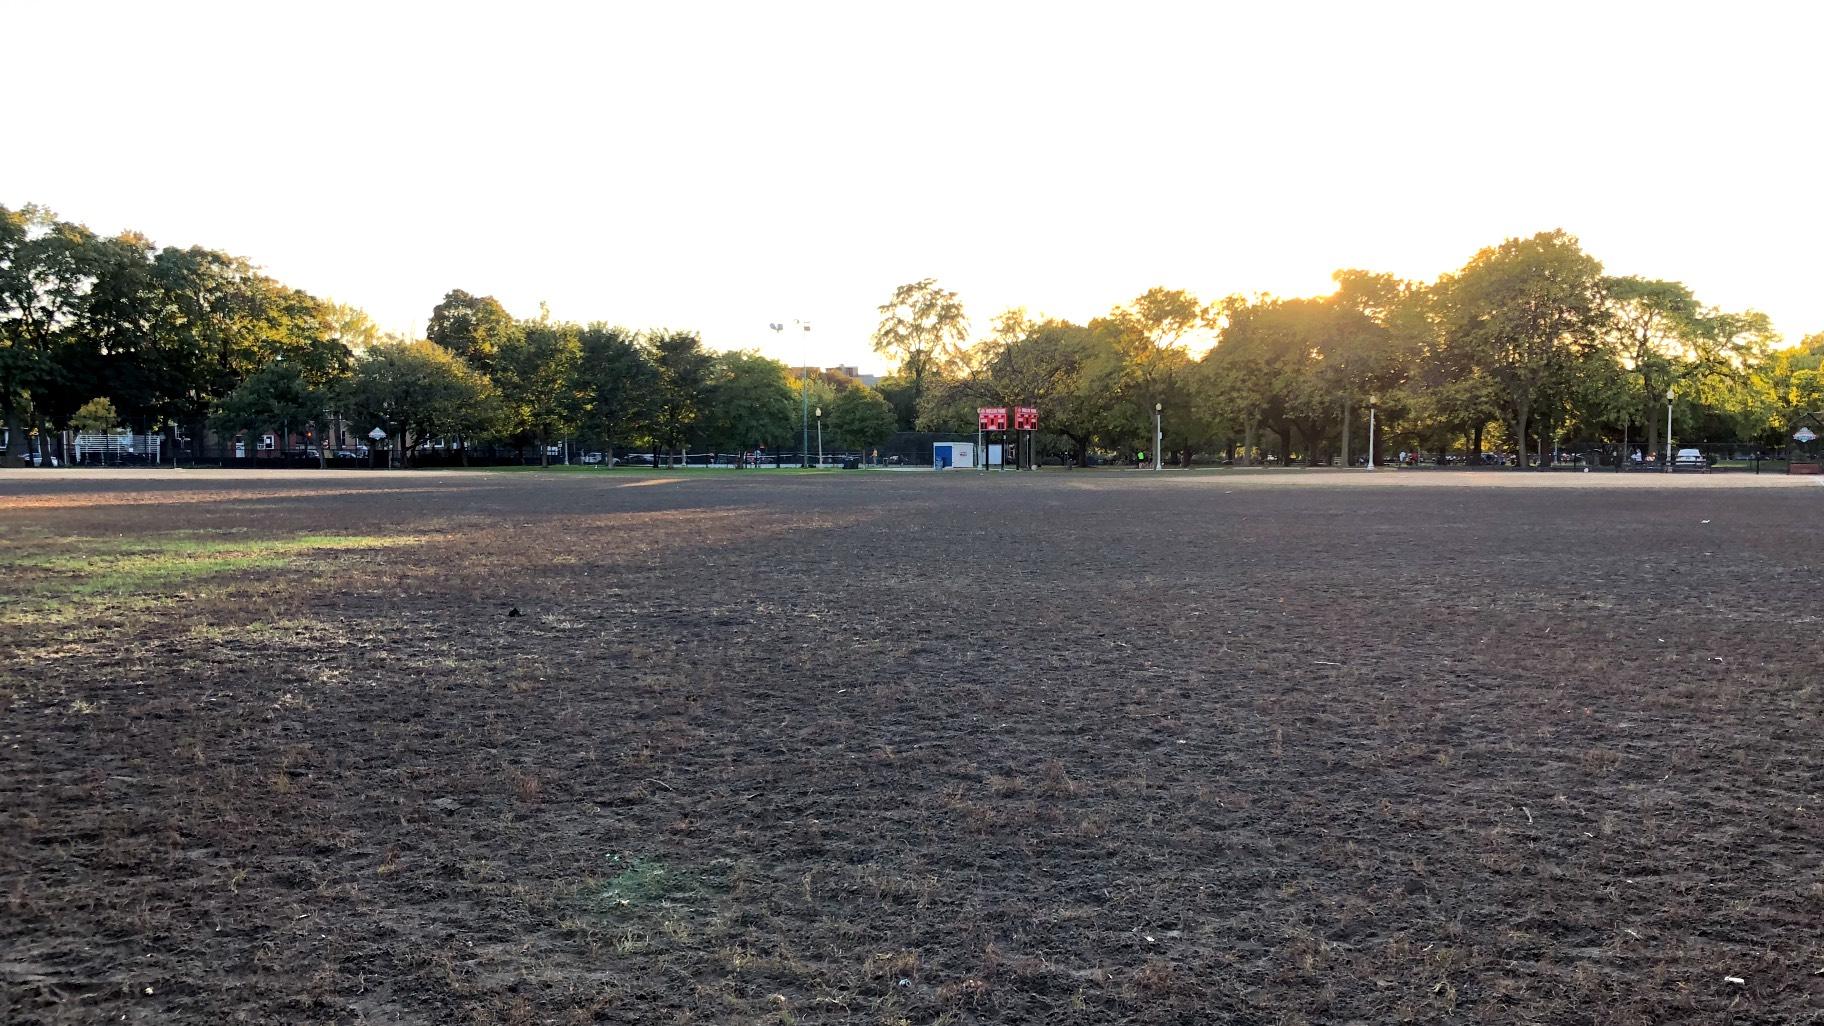 The barren landscape at Lincoln Square's Welles Park following a severe infestation of beetle grubs. (Patty Wetli / WTTW News)